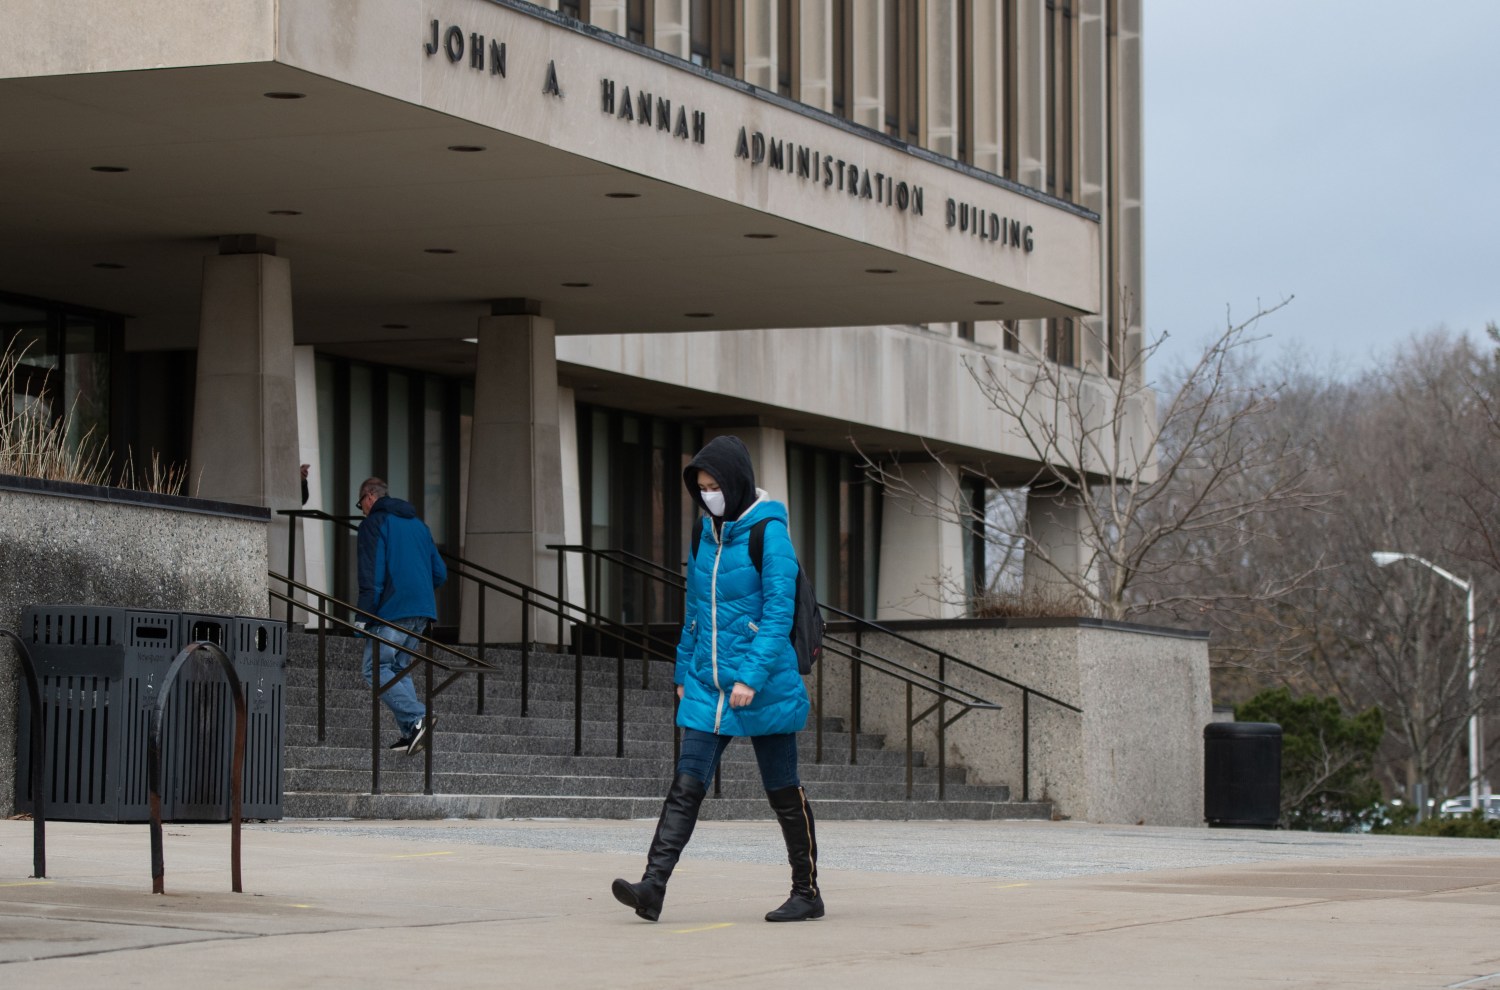 March 11, 2020; Lansing, MI , USA; Michigan State University senior Yue Yang walks past the John Hannah Administration Building Wednesday, March 11, 2020, in East Lansing, Mich.  "The president made a good decision, everyone should just be safe and pay attention," she said. The university will close person-to-person classes until April 20 and conduct classes online to minimize the potential spread of the coronavirus.  "My parents worry about me but I'll be alright." Mandatory Credit: Matthew Dae Smith/Lansing State Journal via USA TODAY NETWORK